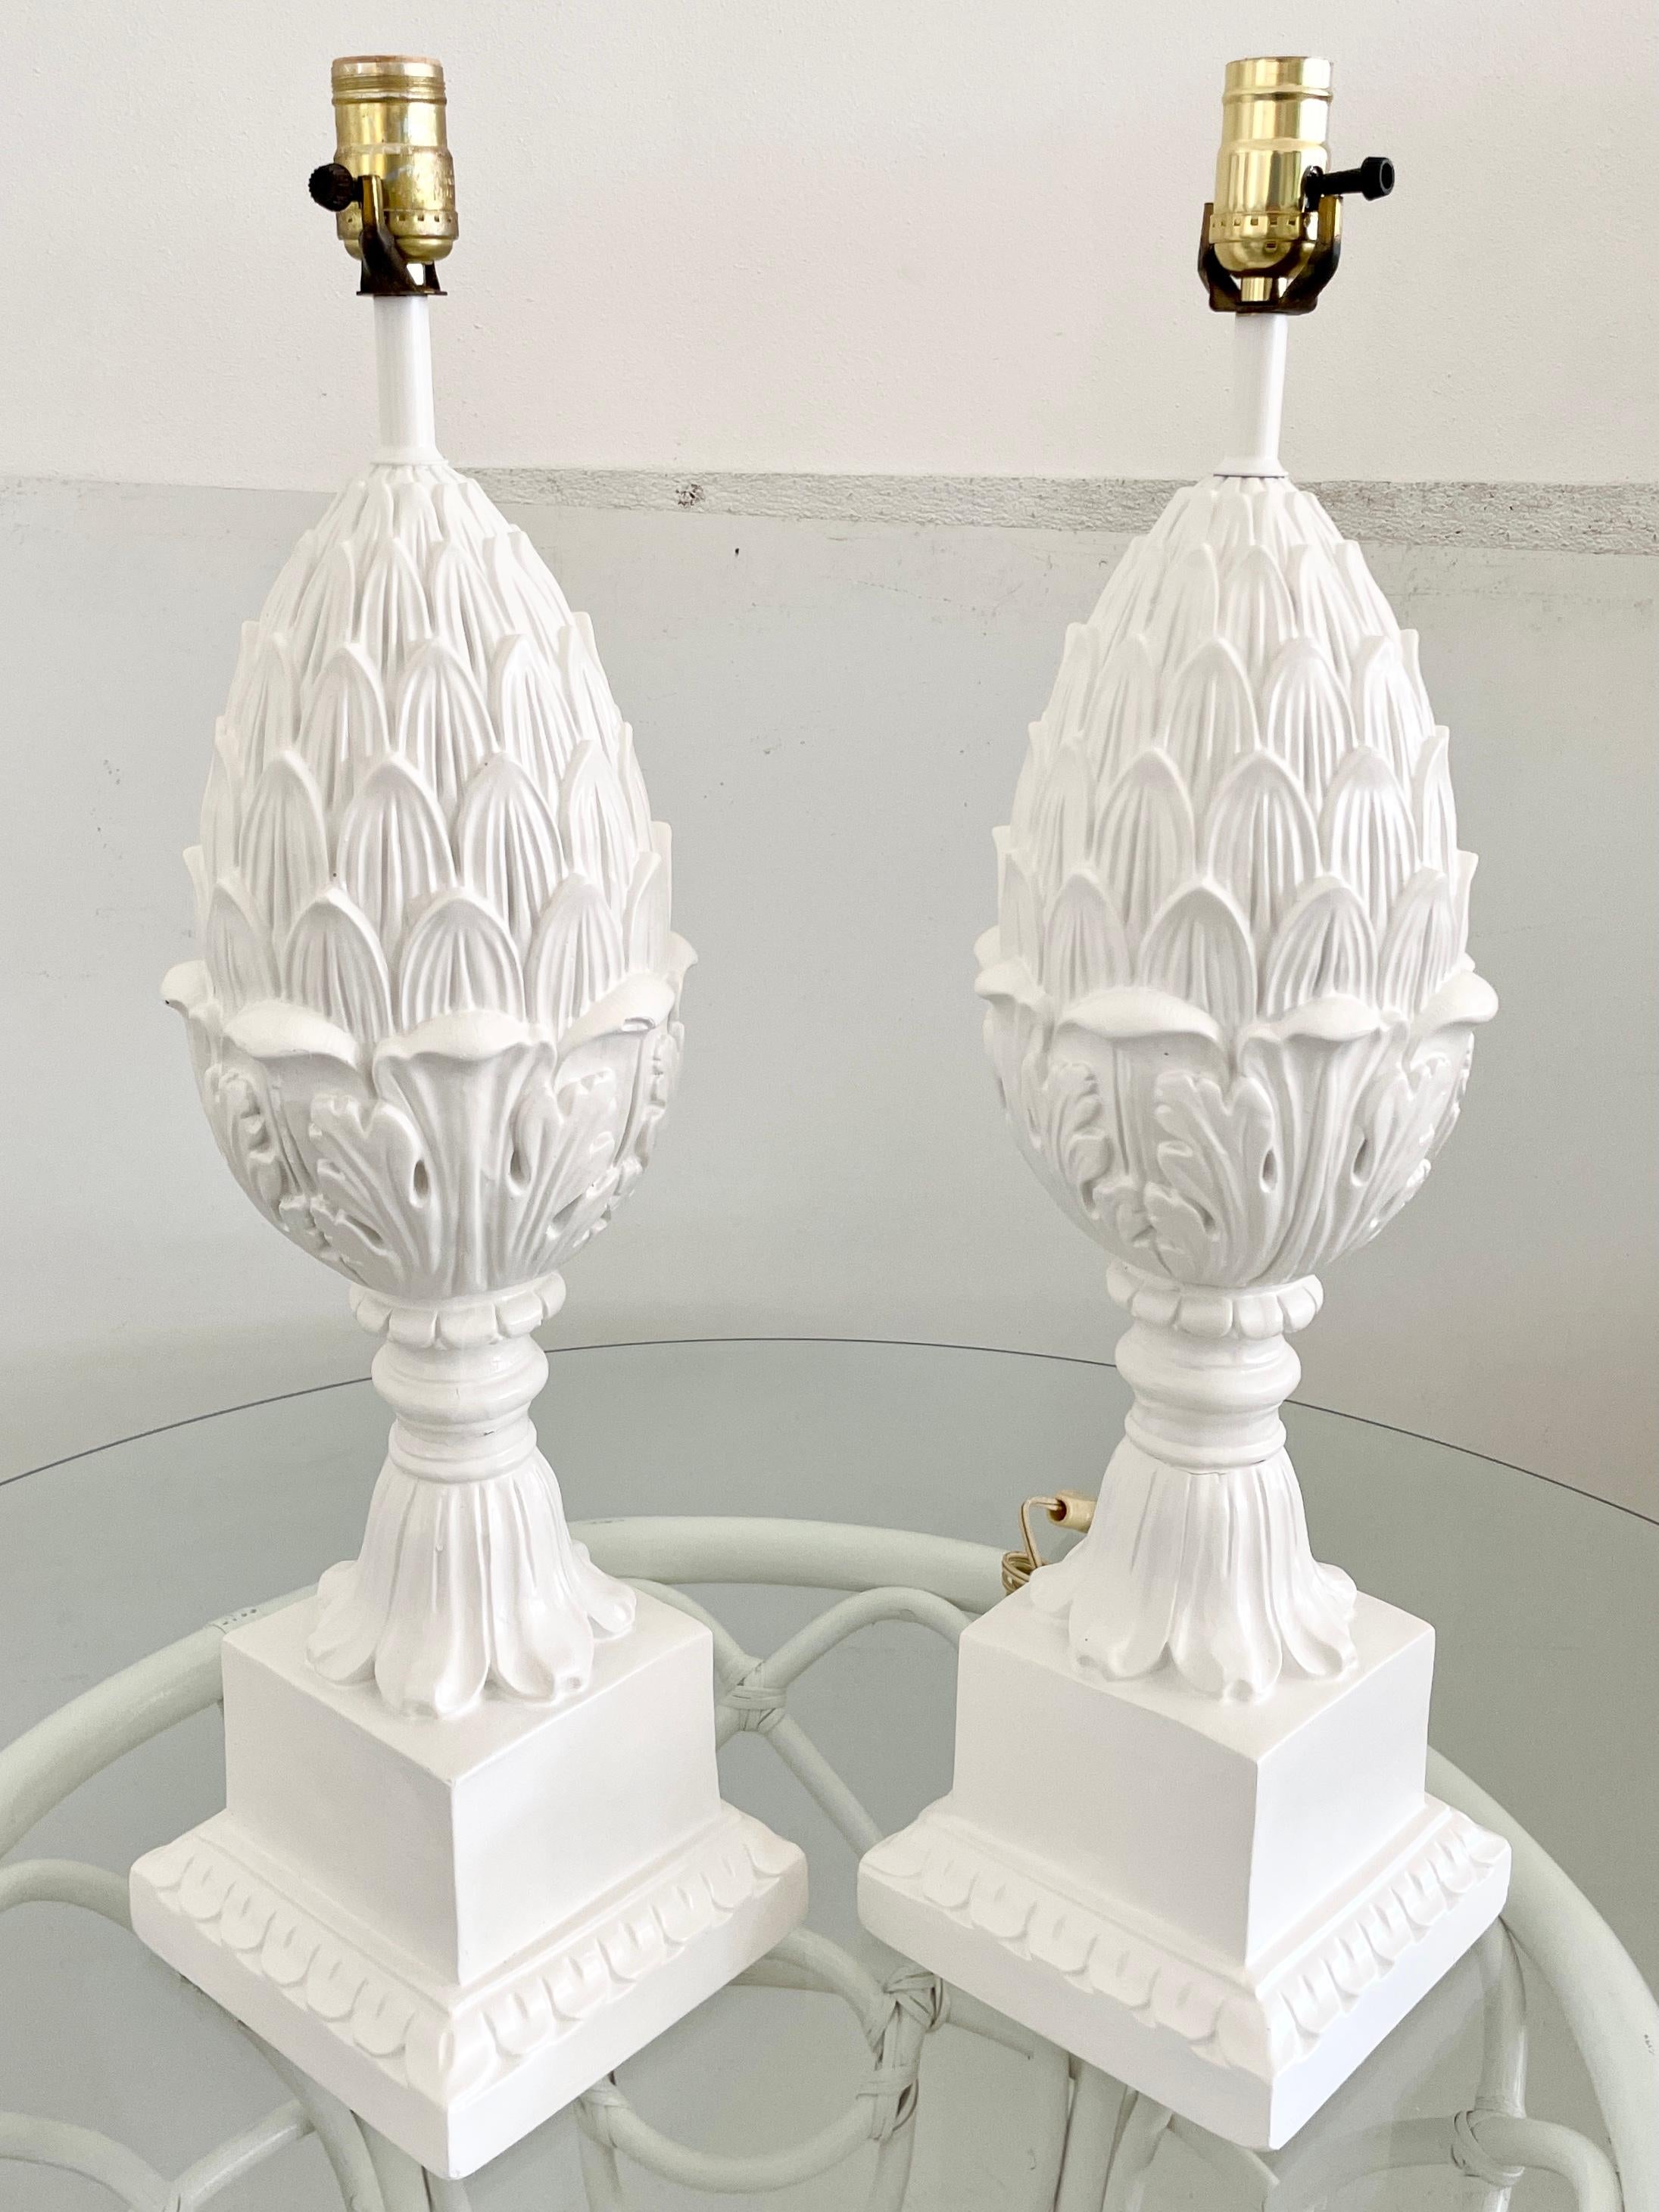 Plaster Boho Chic Pineapple Table Lamps, a Pair For Sale